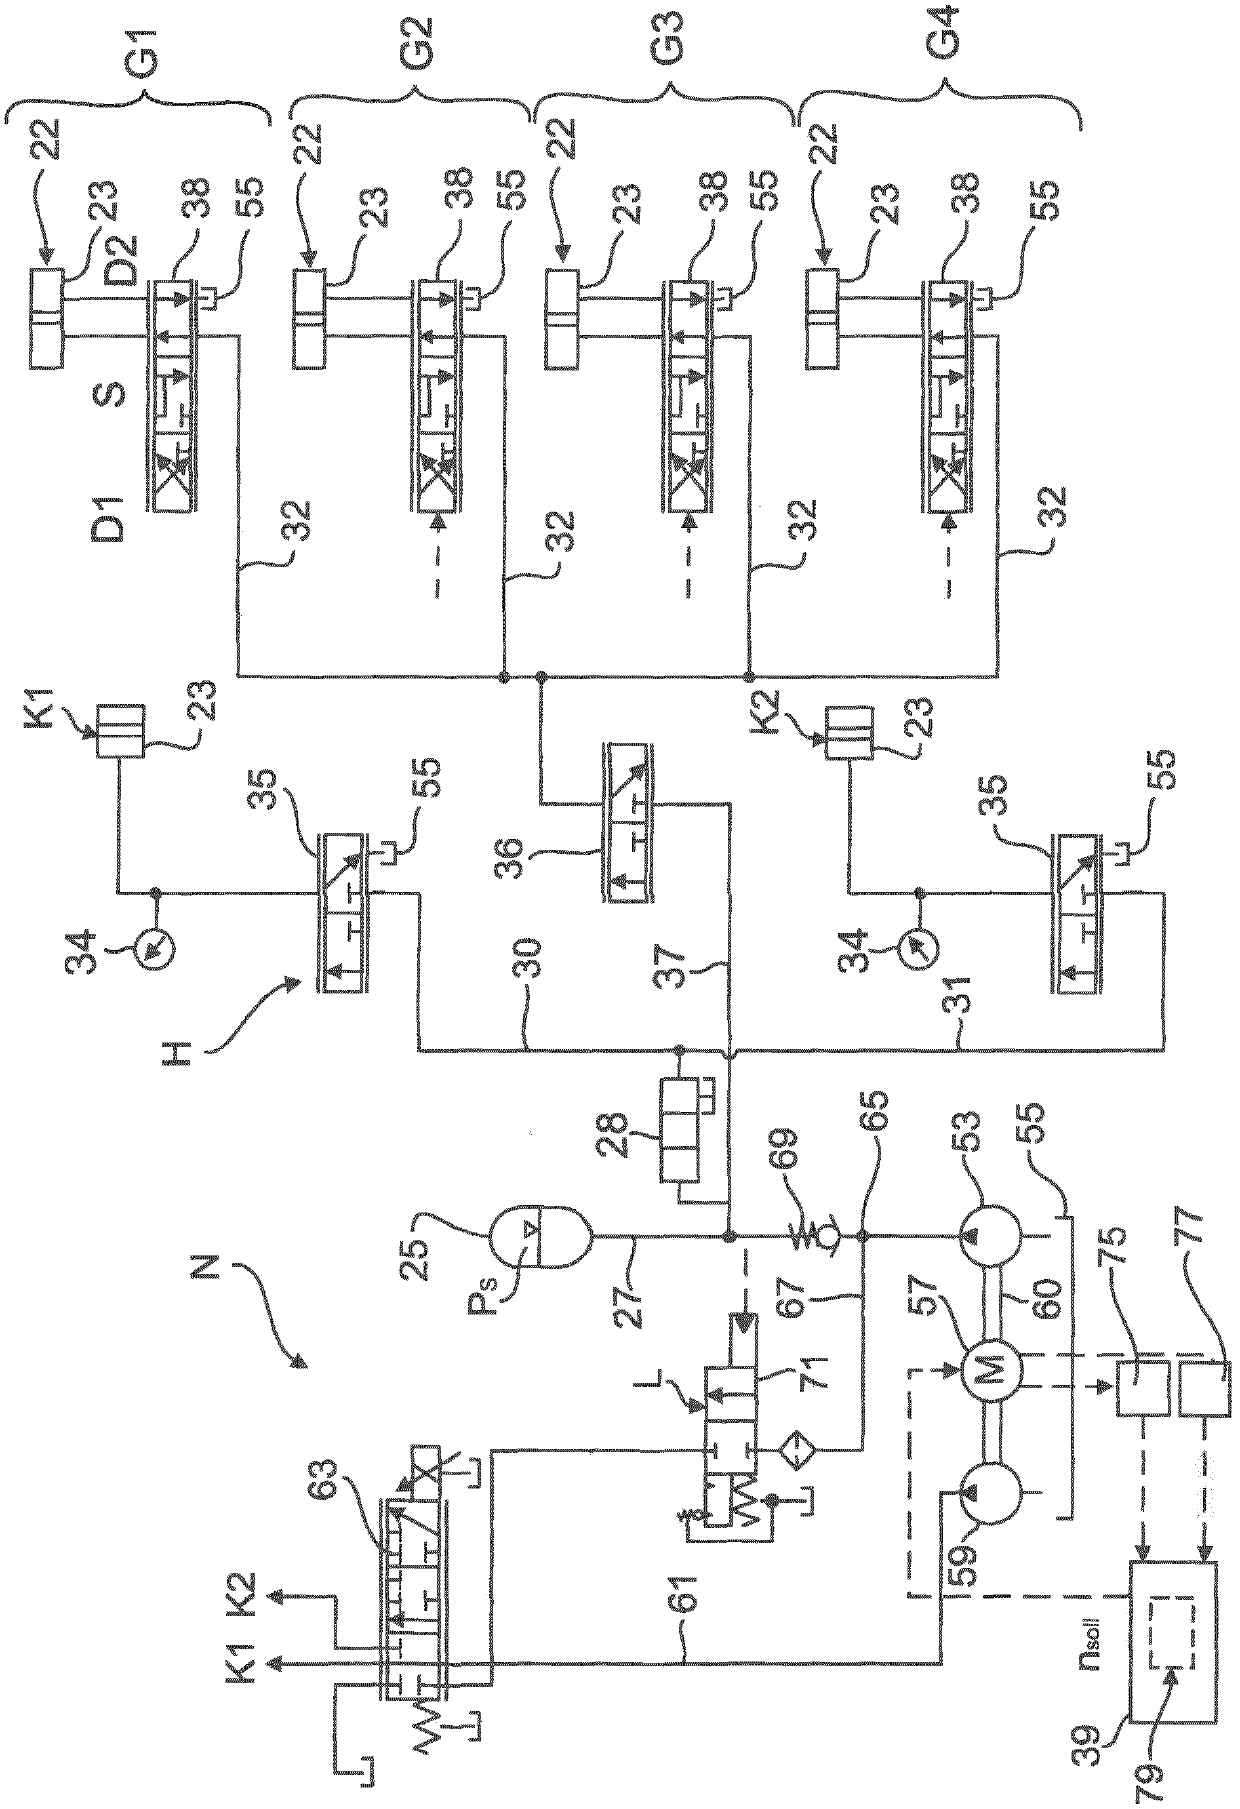 Hydraulic system for an automatic transmission of a motor vehicle